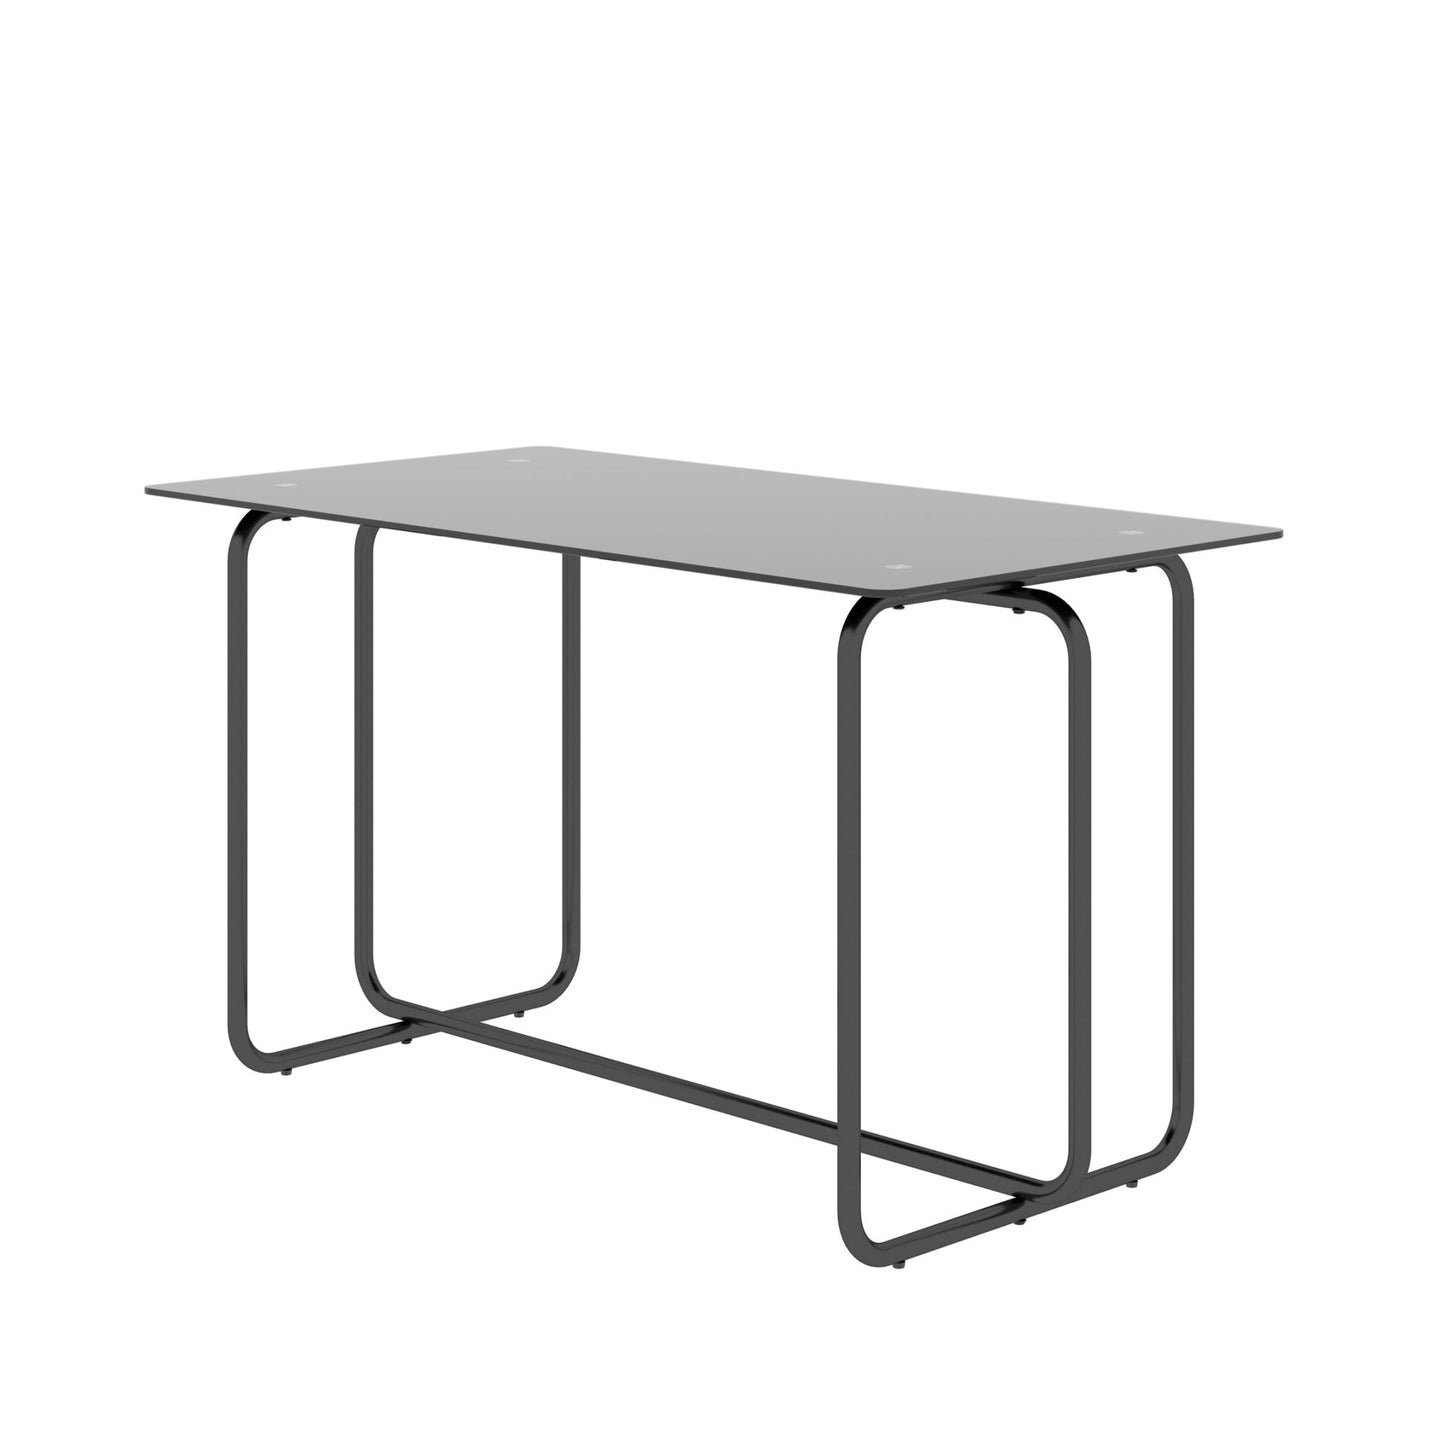 5-piece rectangle dining table set -tempered glass, black